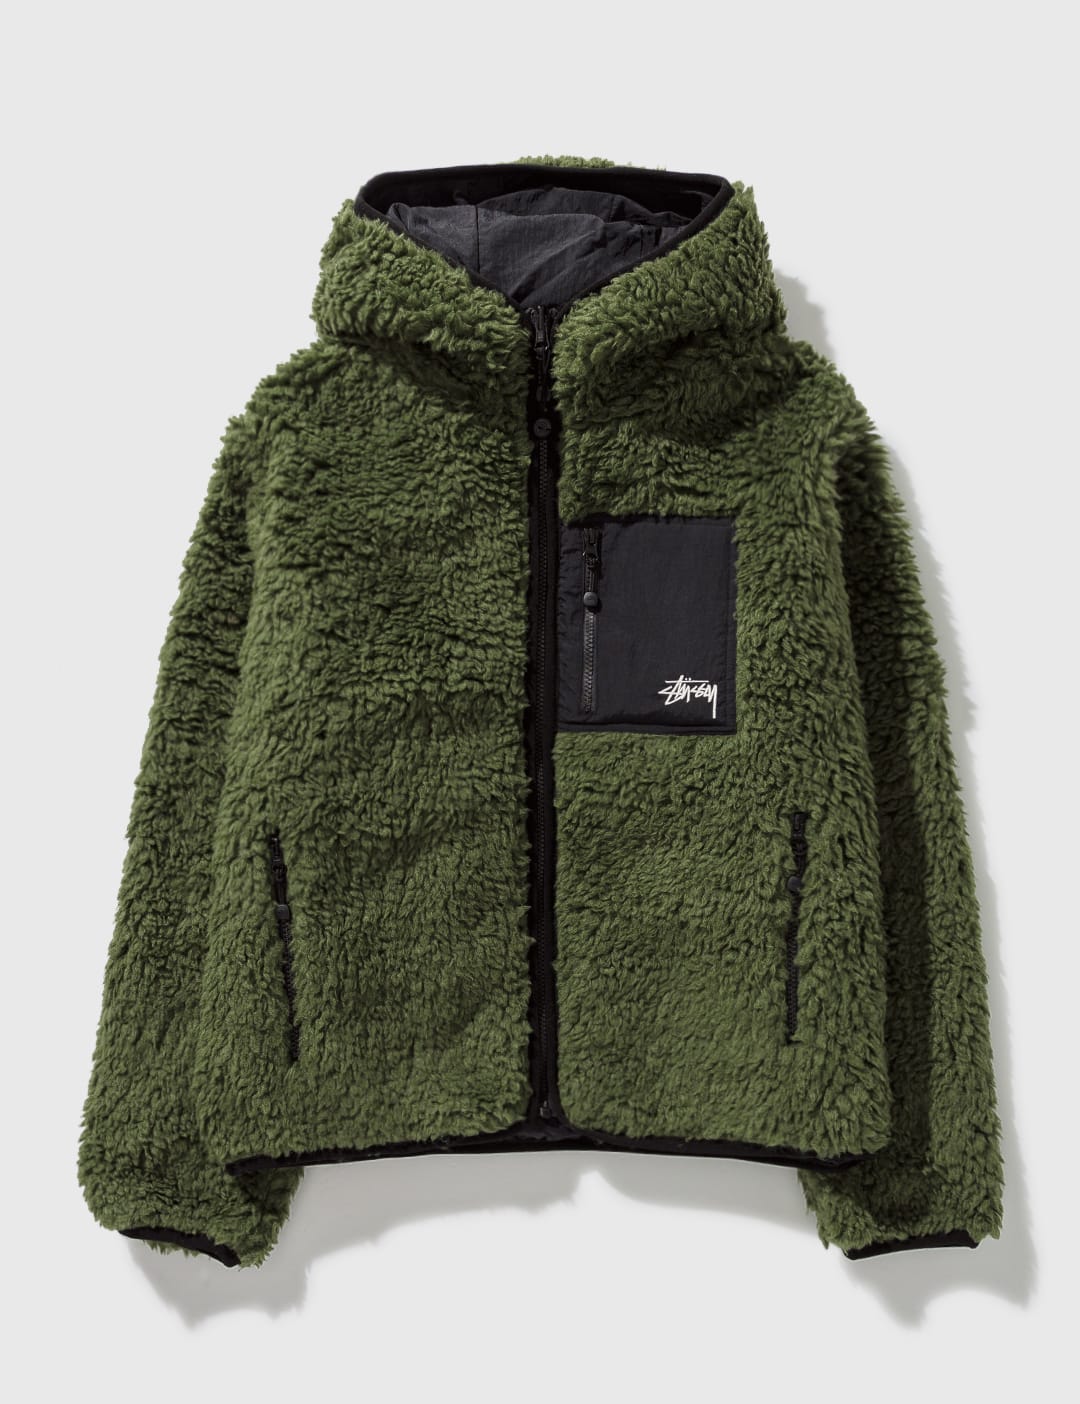 Stüssy - Sherpa Jacket | HBX - Globally Curated Fashion and